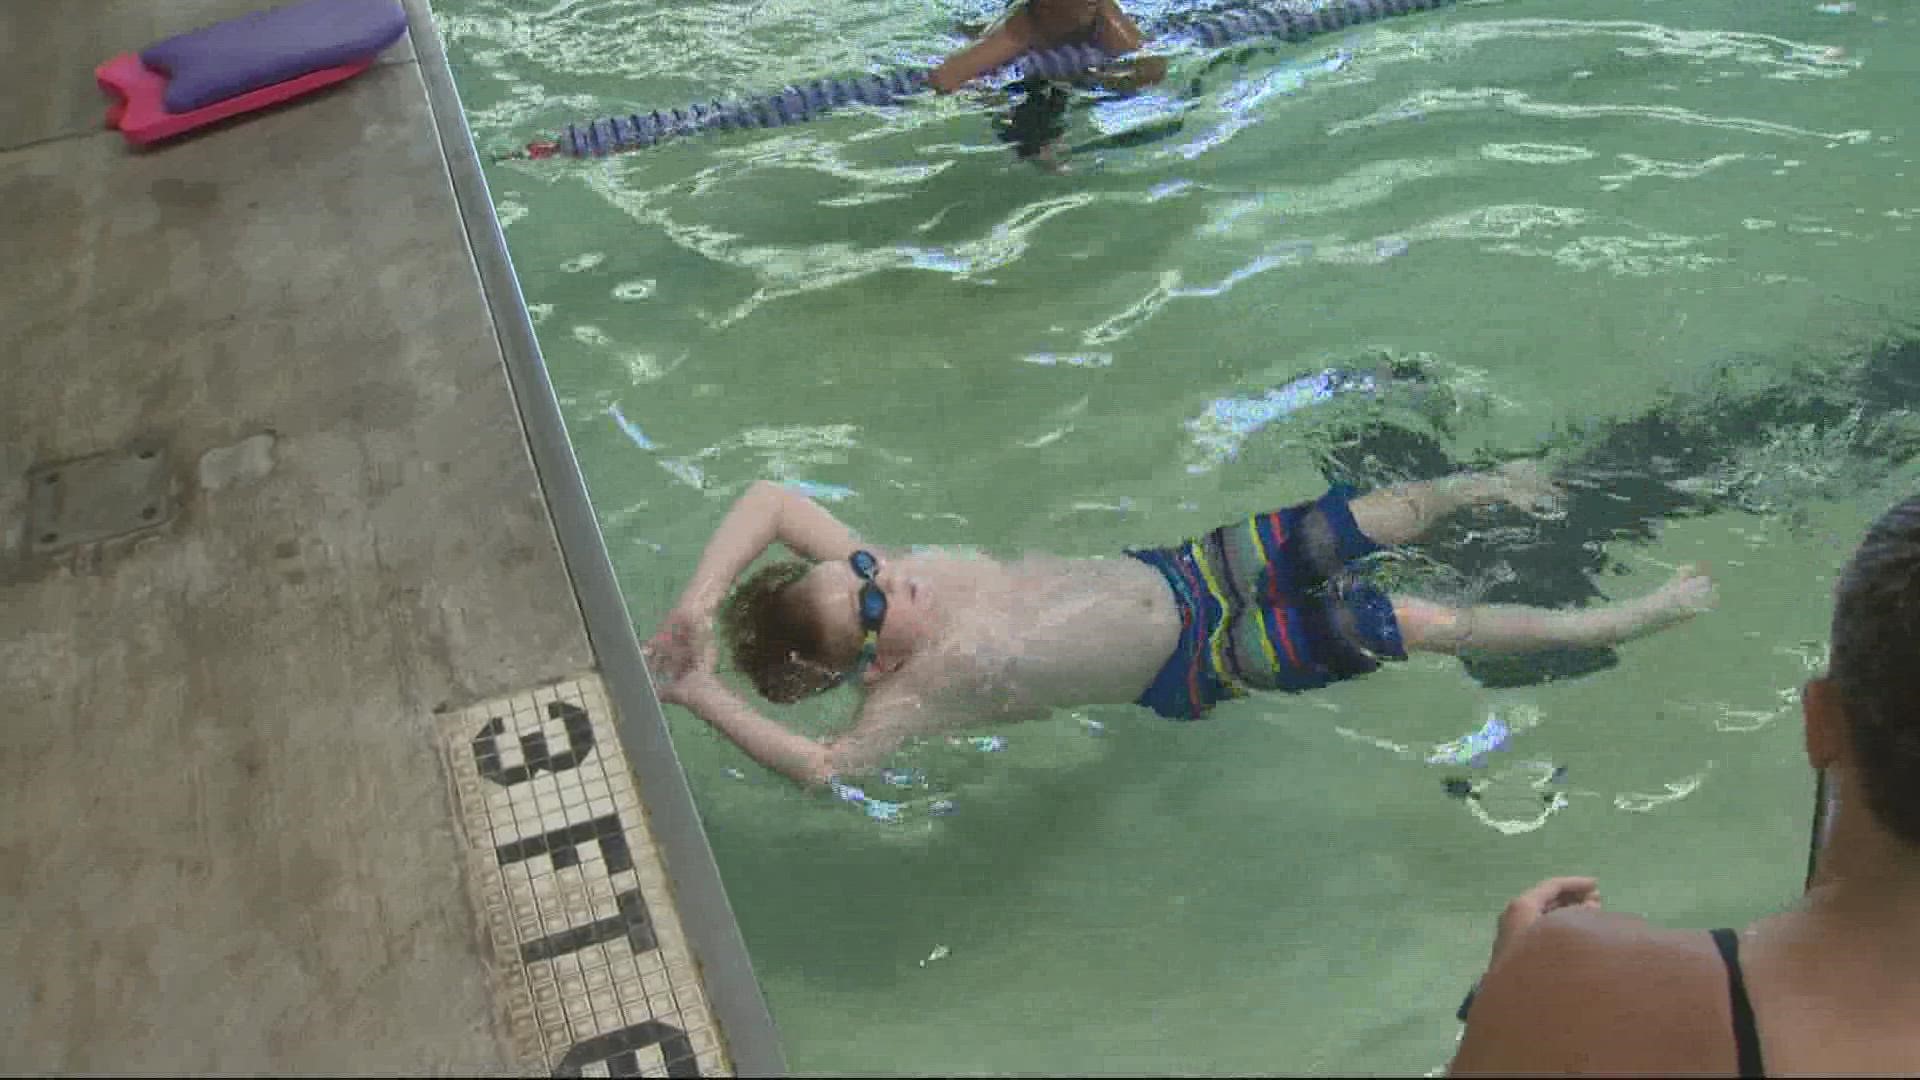 Camp Spark helps people who are blind, or have disabilities beyond visual impairment, build connections through sports. It's held at Linfield University.